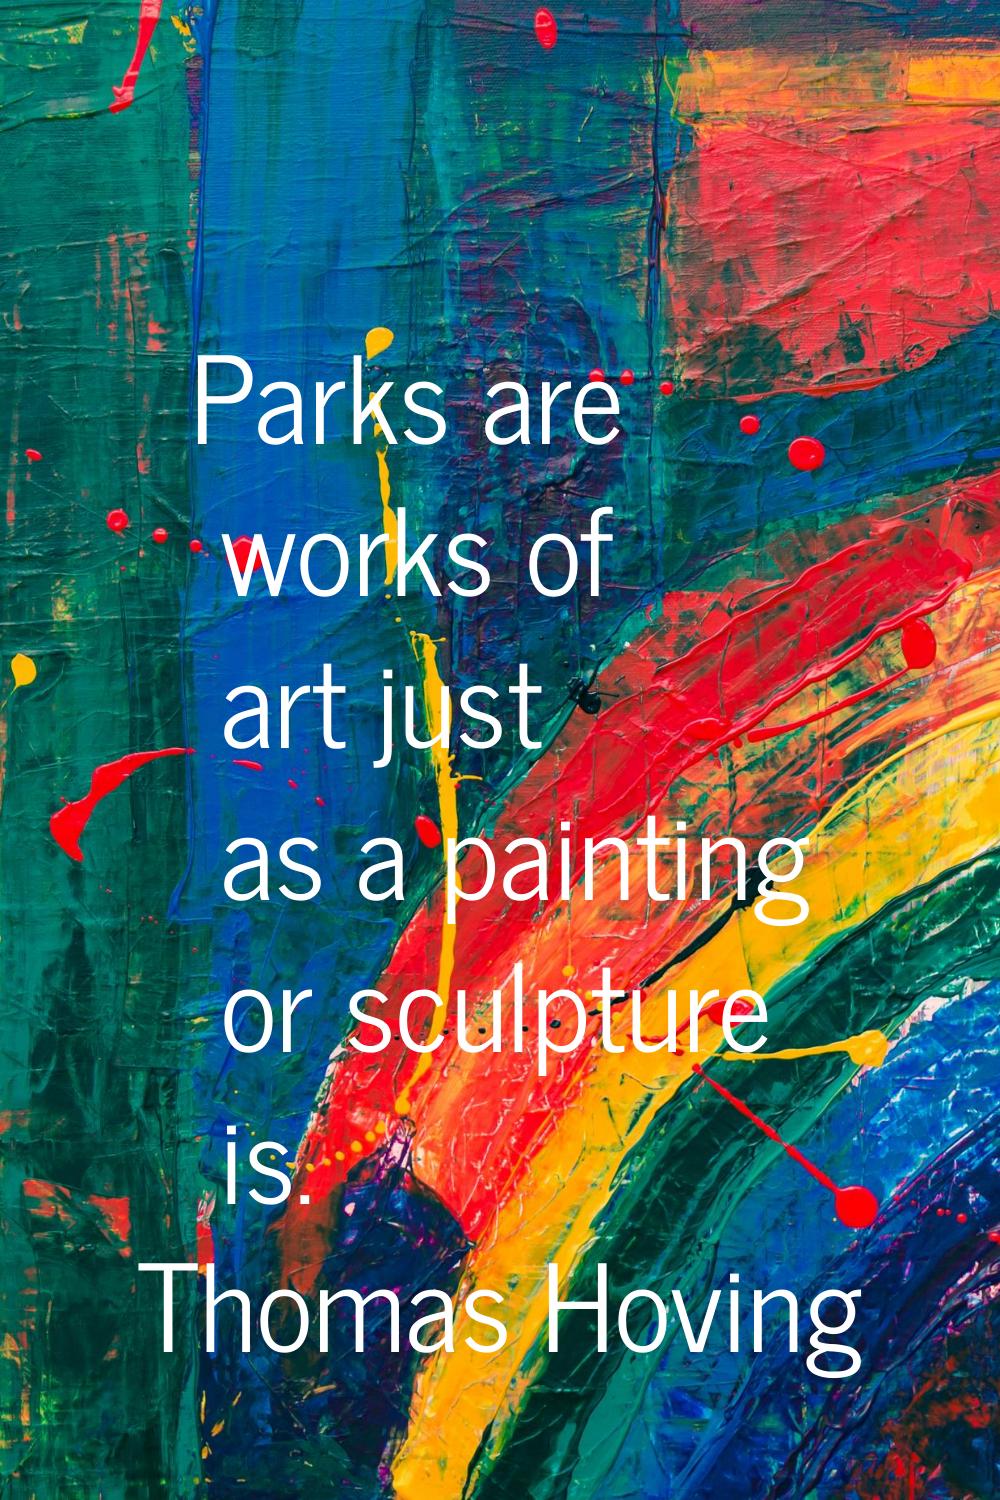 Parks are works of art just as a painting or sculpture is.